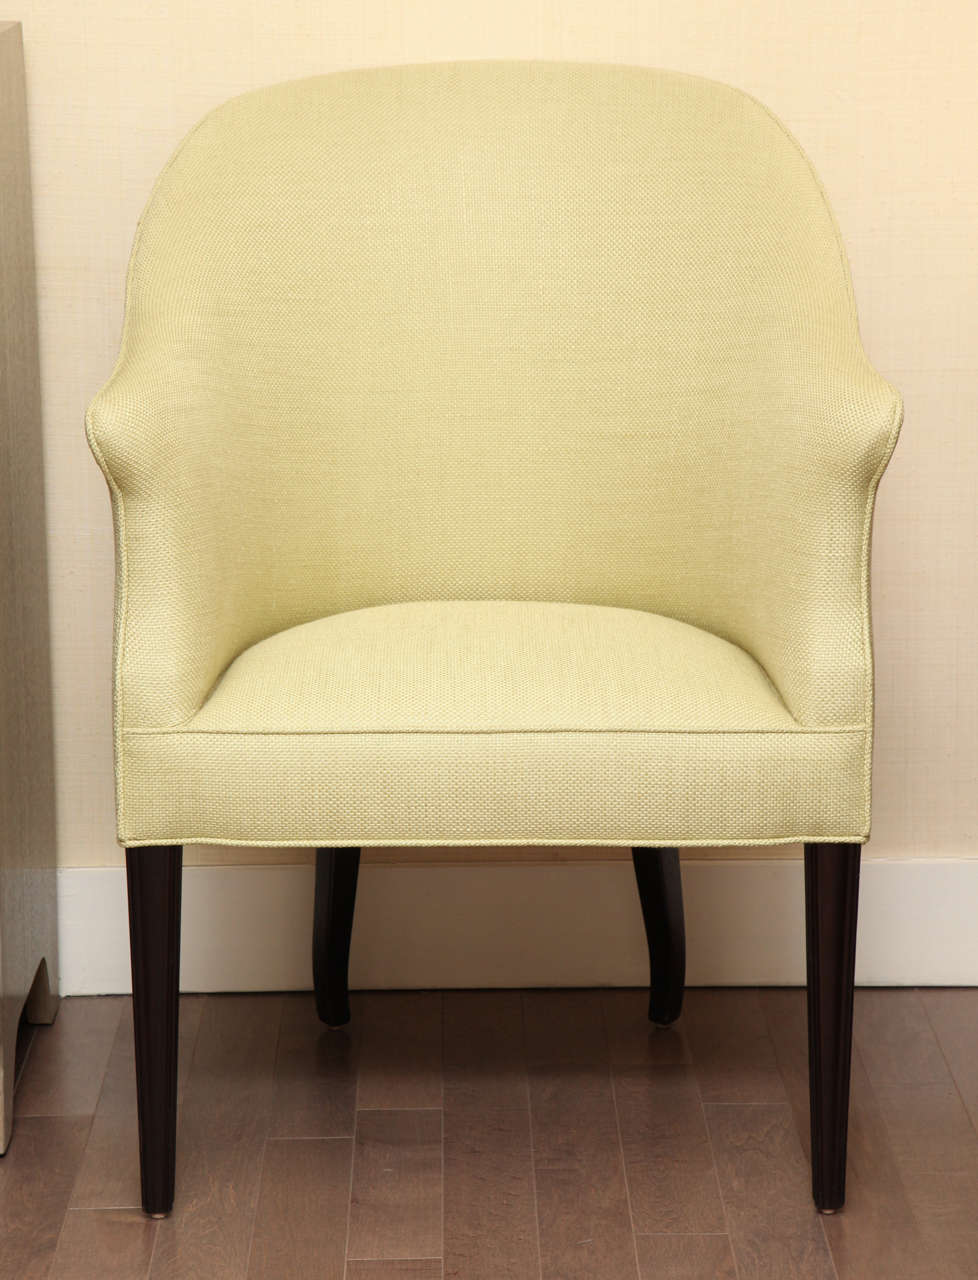 American The Thomas Chair by Duane Modern For Sale